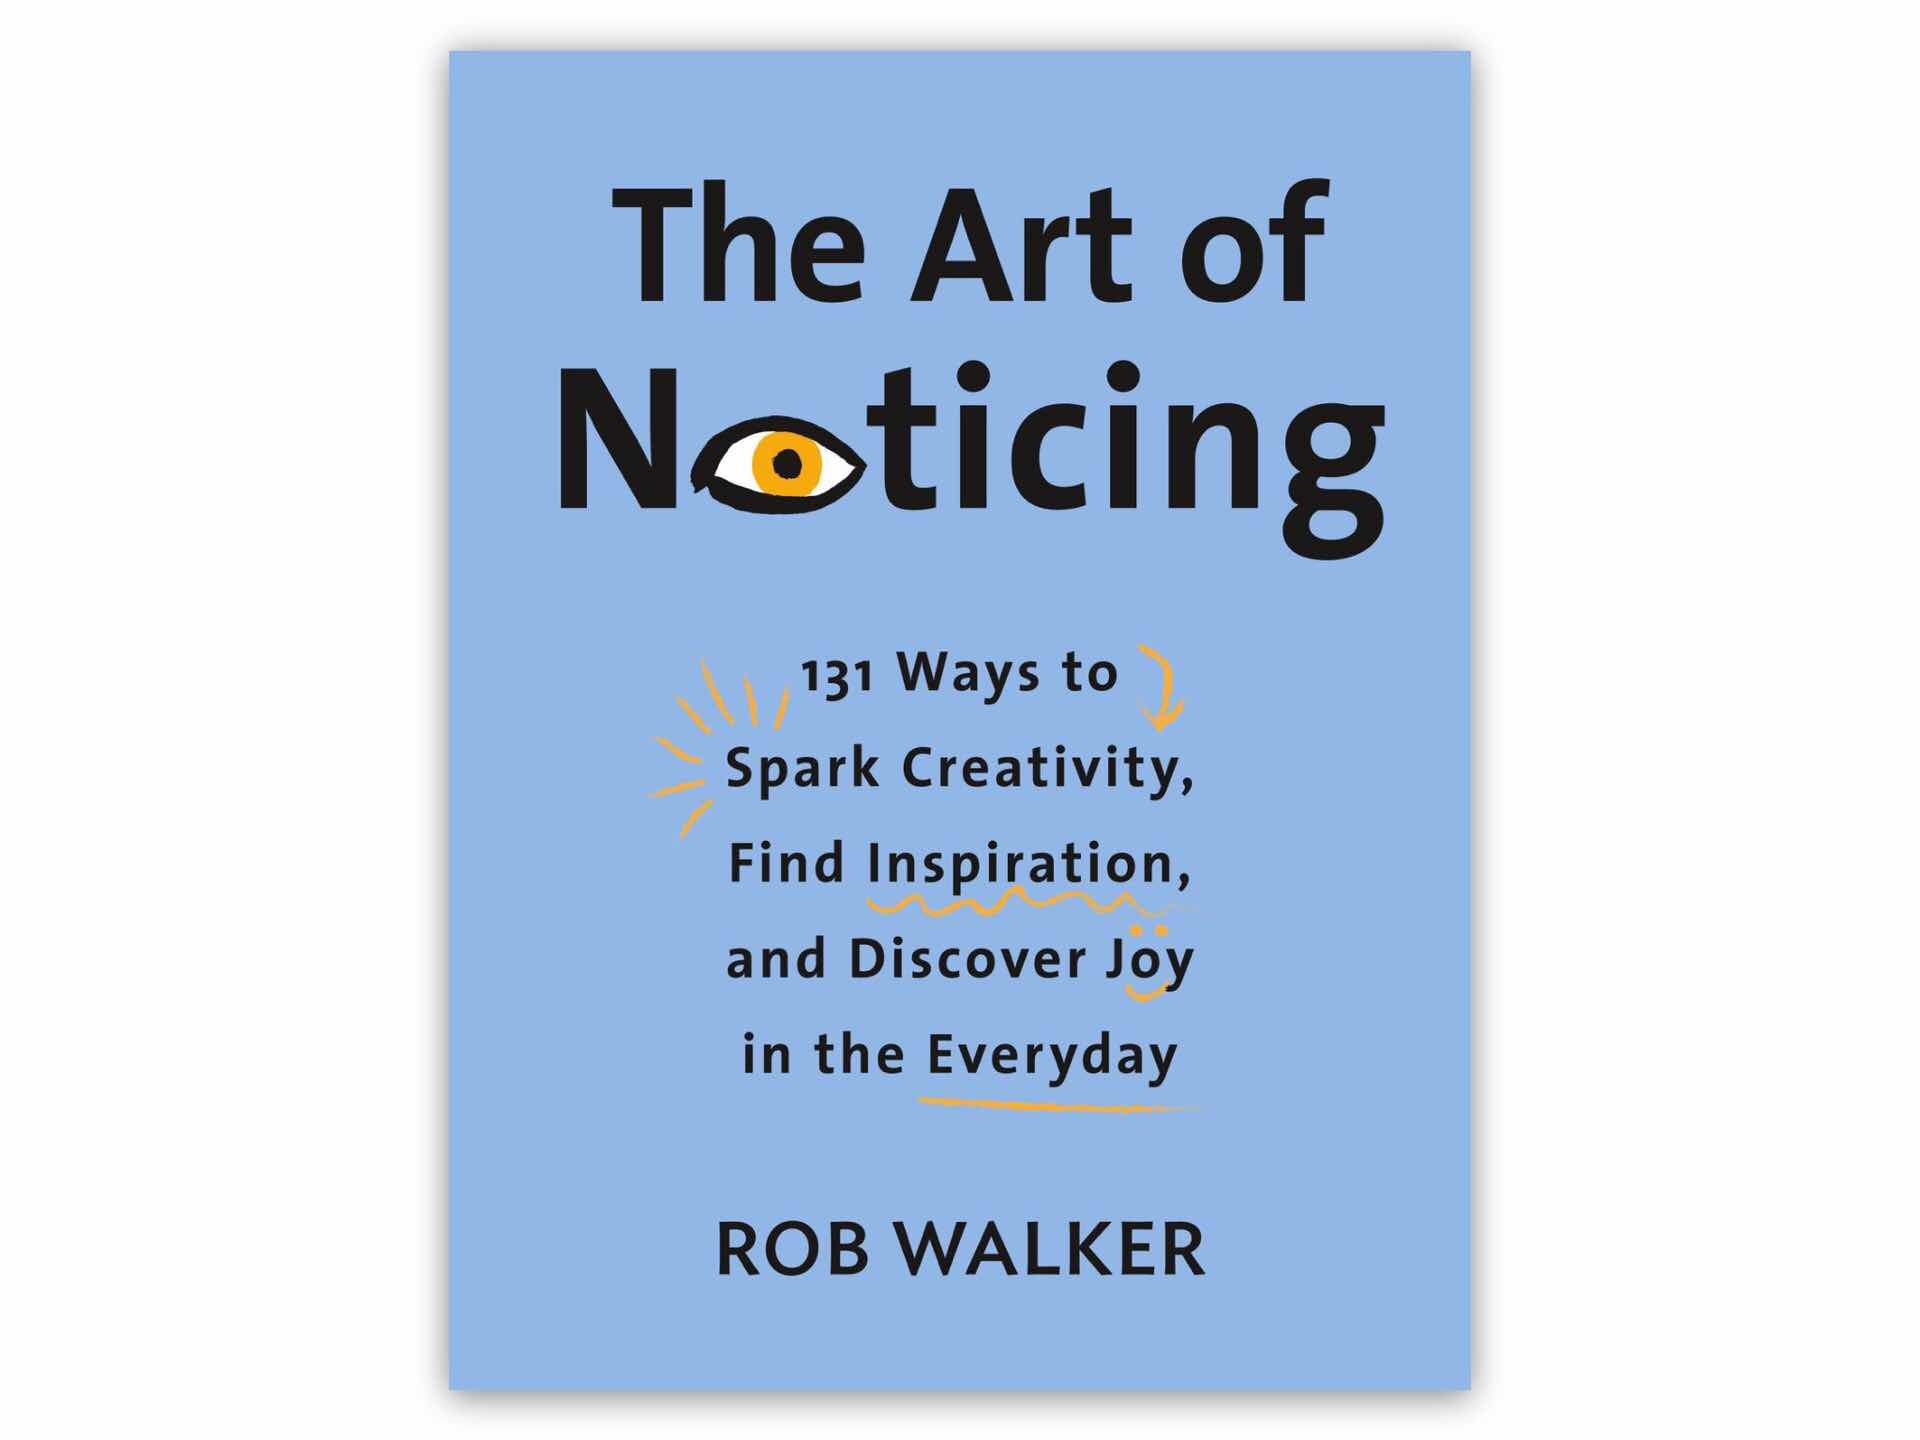 The Art of Noticing by Rob Walker ($17 hardcover)